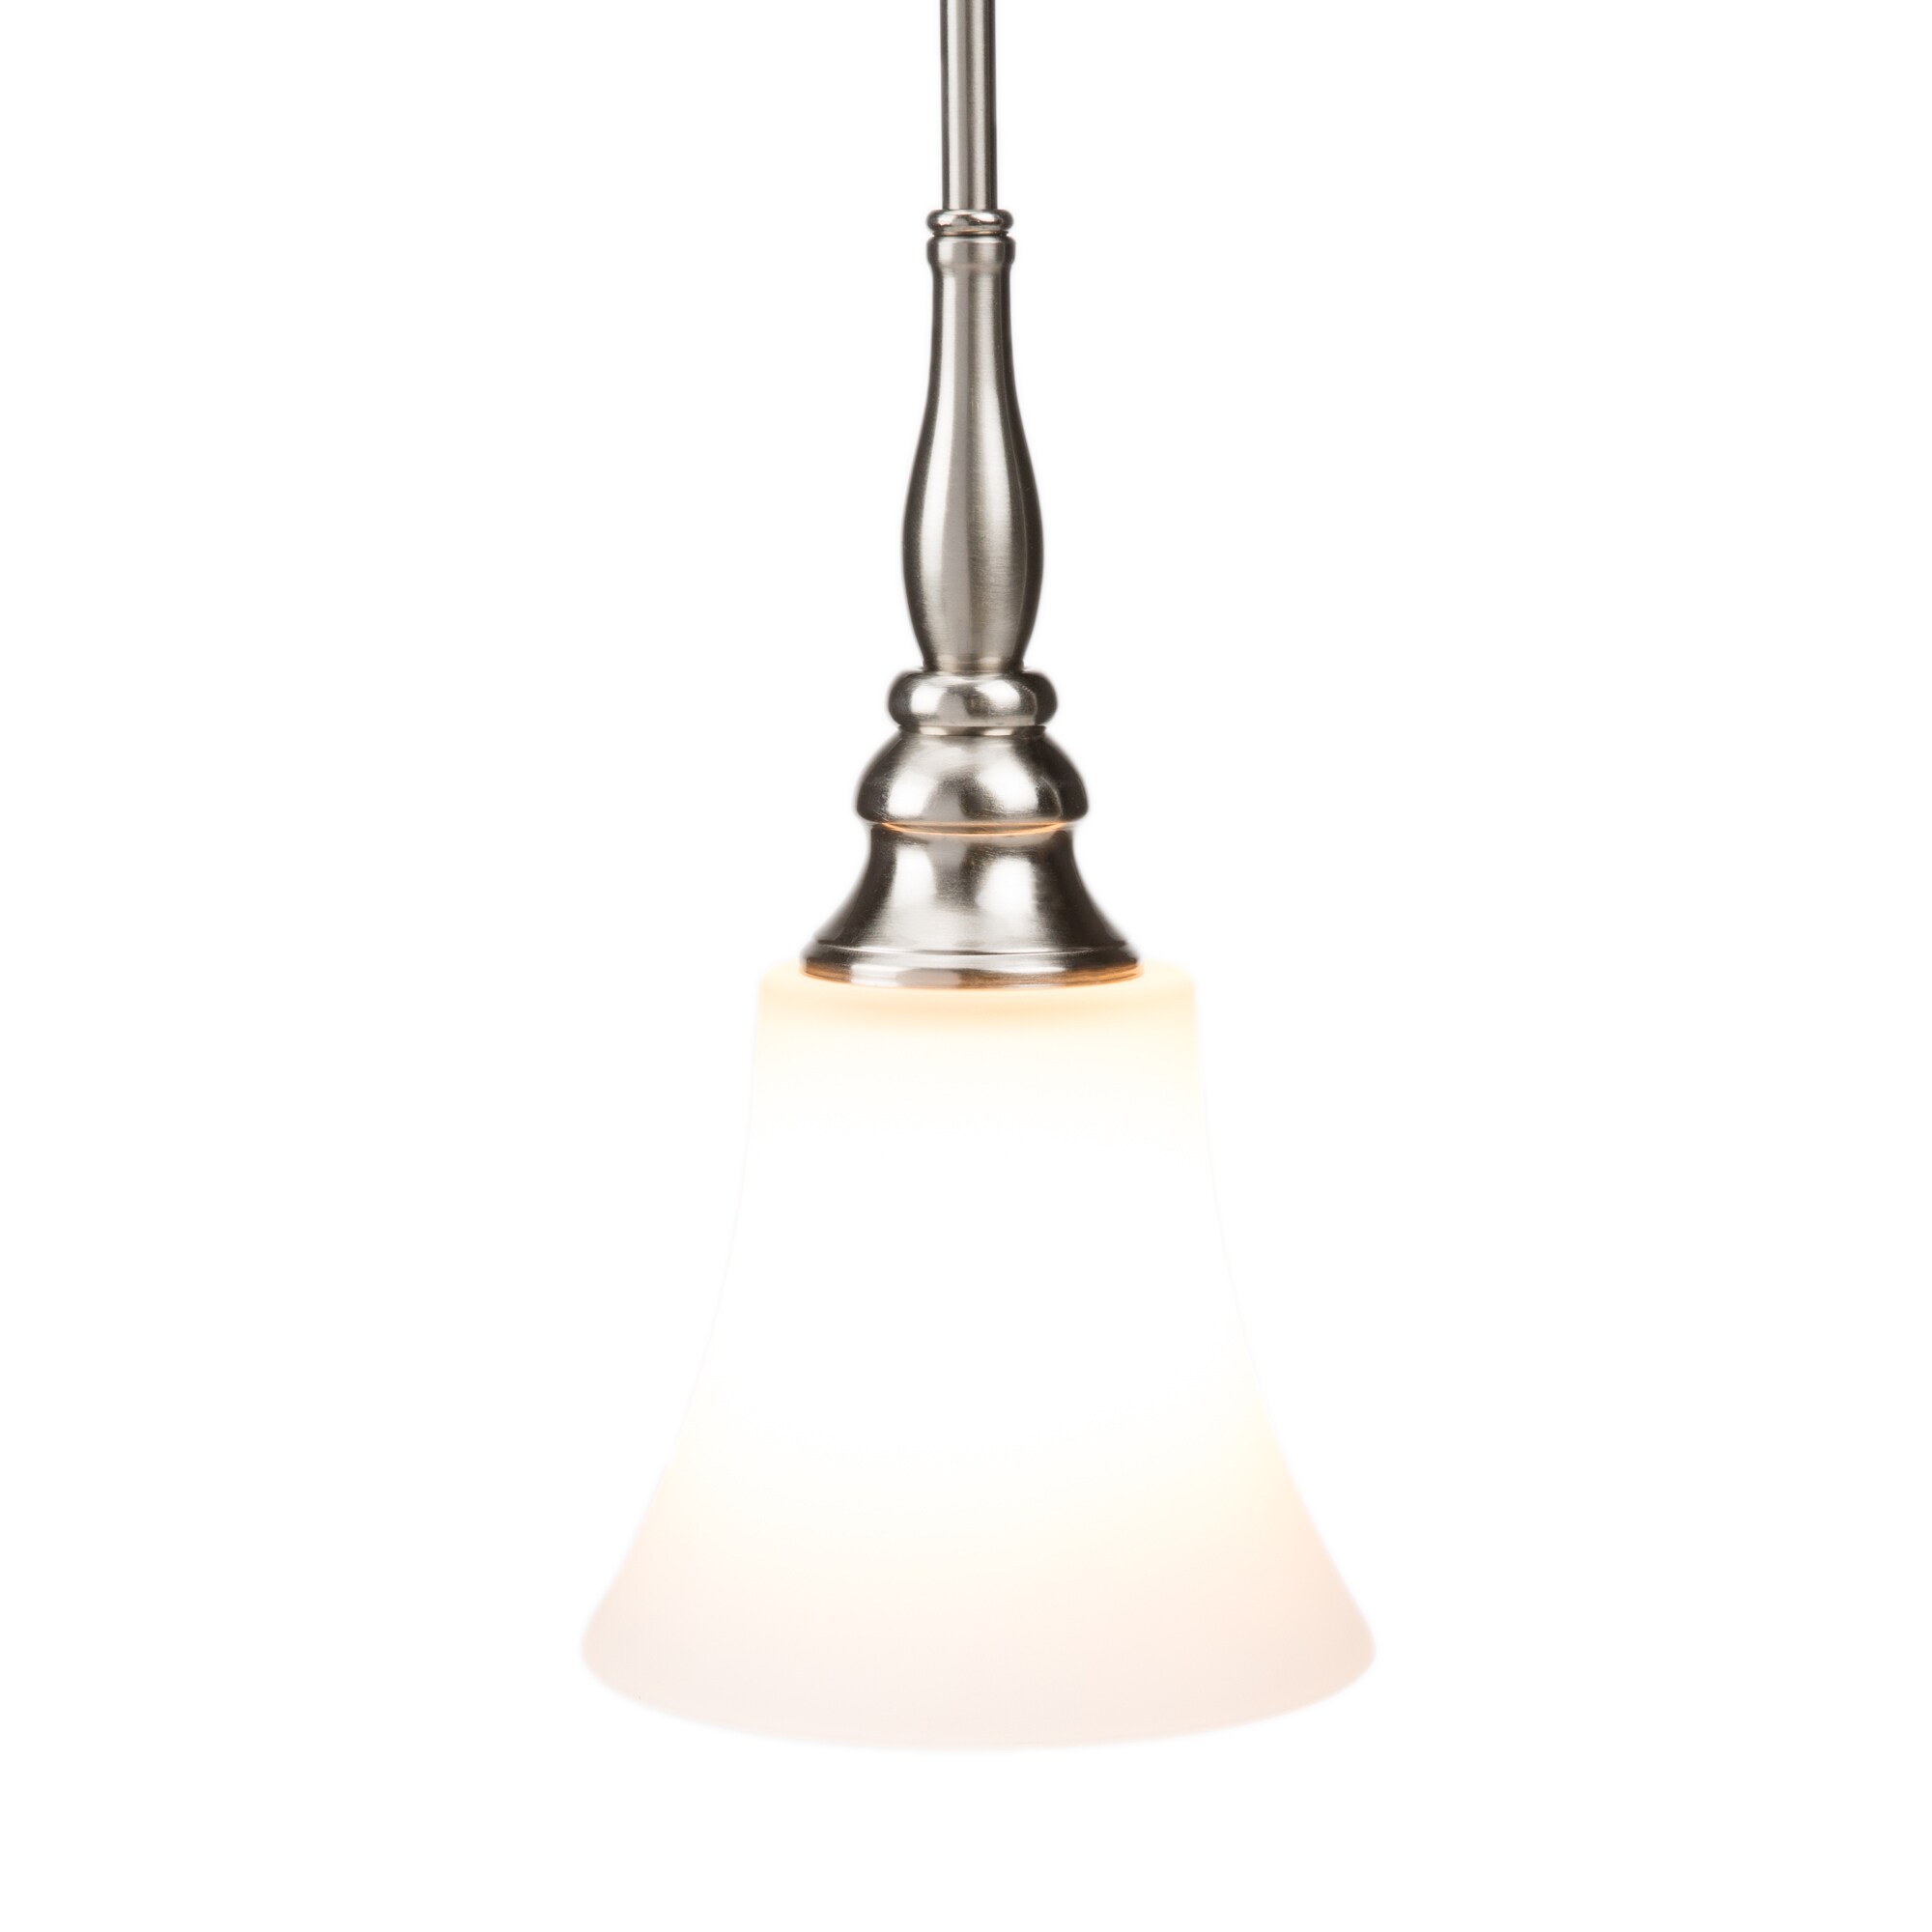 Alan Roth Ylt-0923mp Mini Pendant Brushed Nickel Frosted glass shade. 